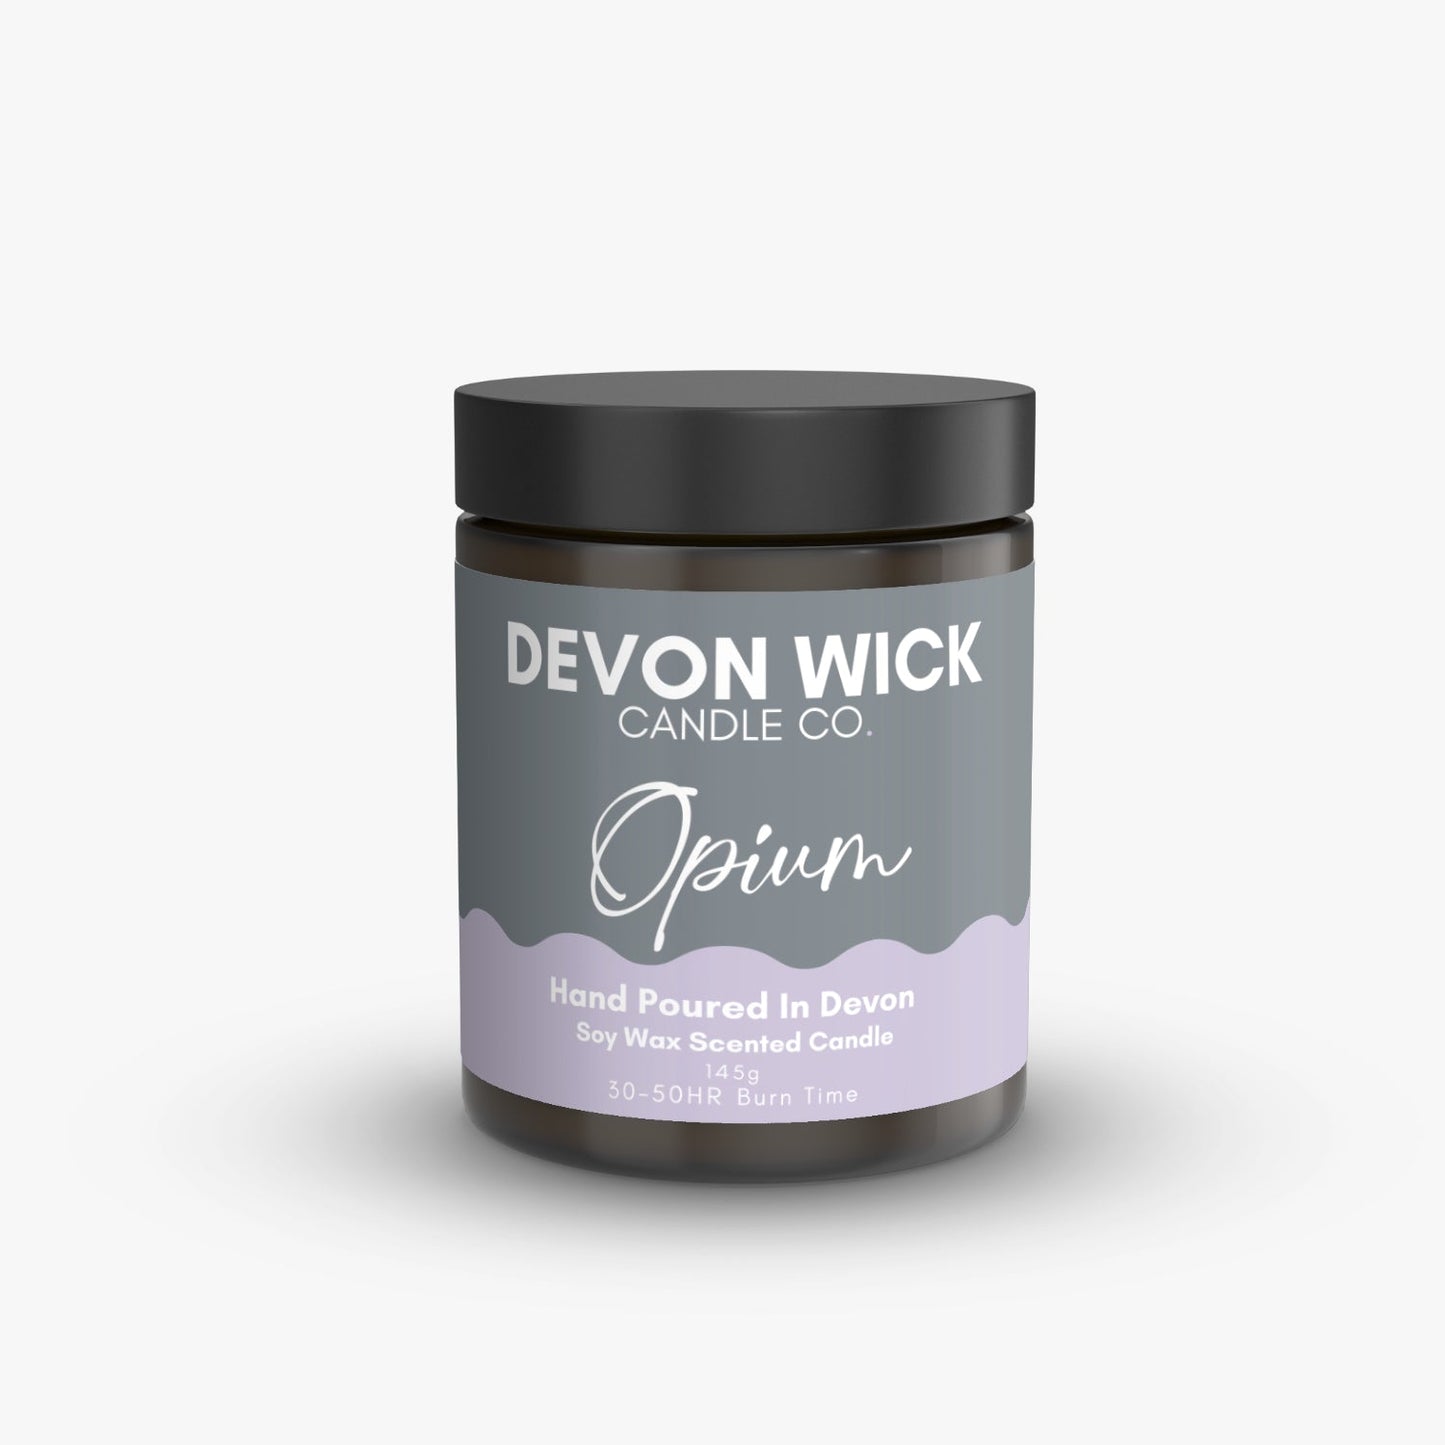 Devon Wick Candle Co. Limited Opium Soy Wax Candle